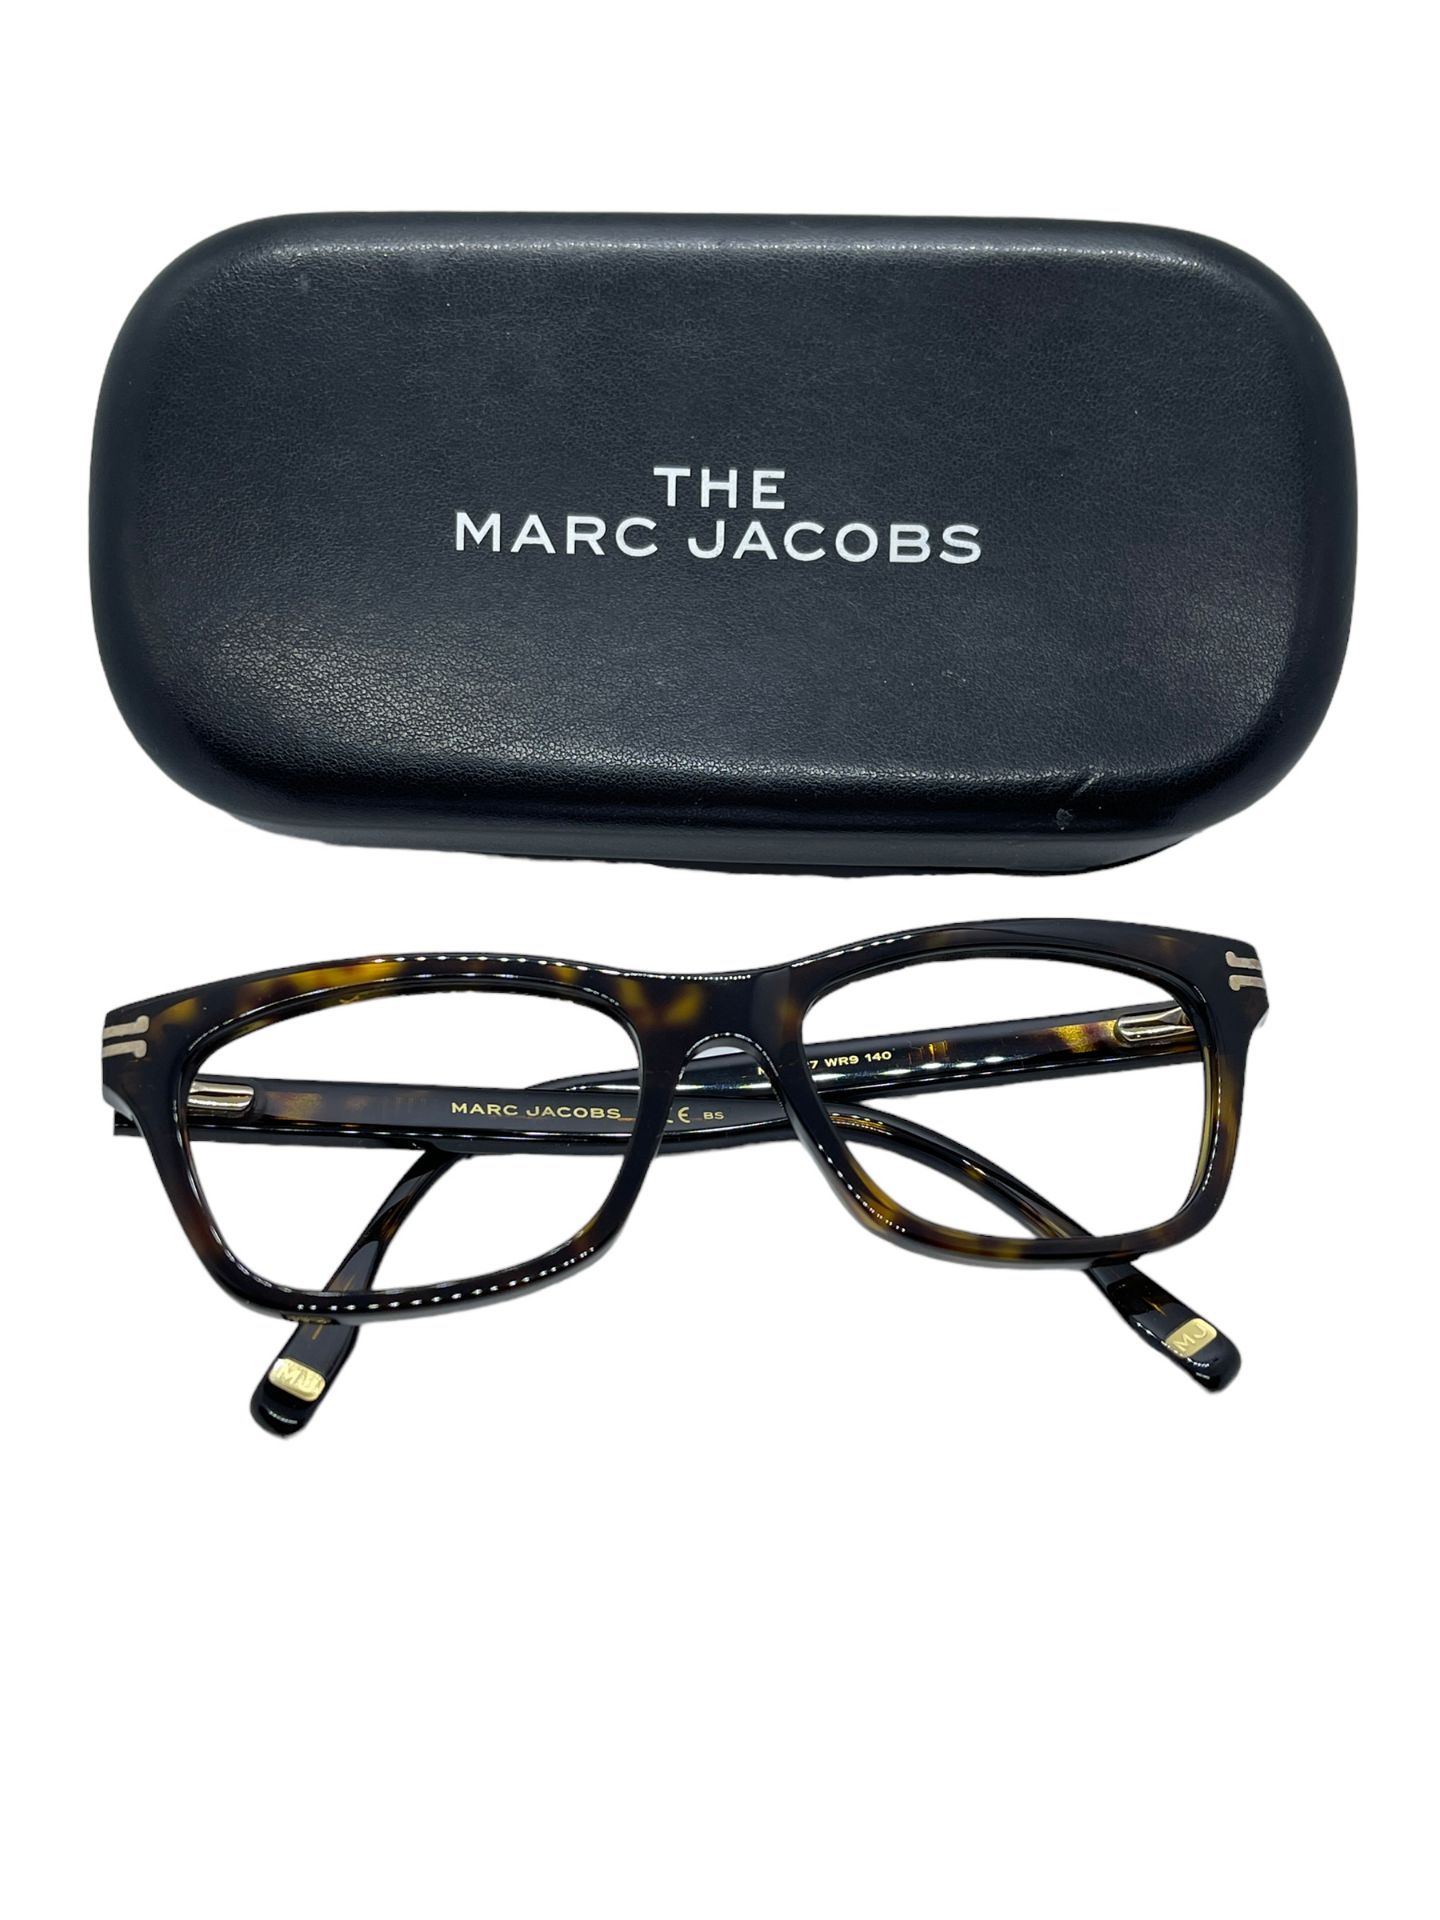 Marc Jacob's new spectacles mens. - Image 4 of 9